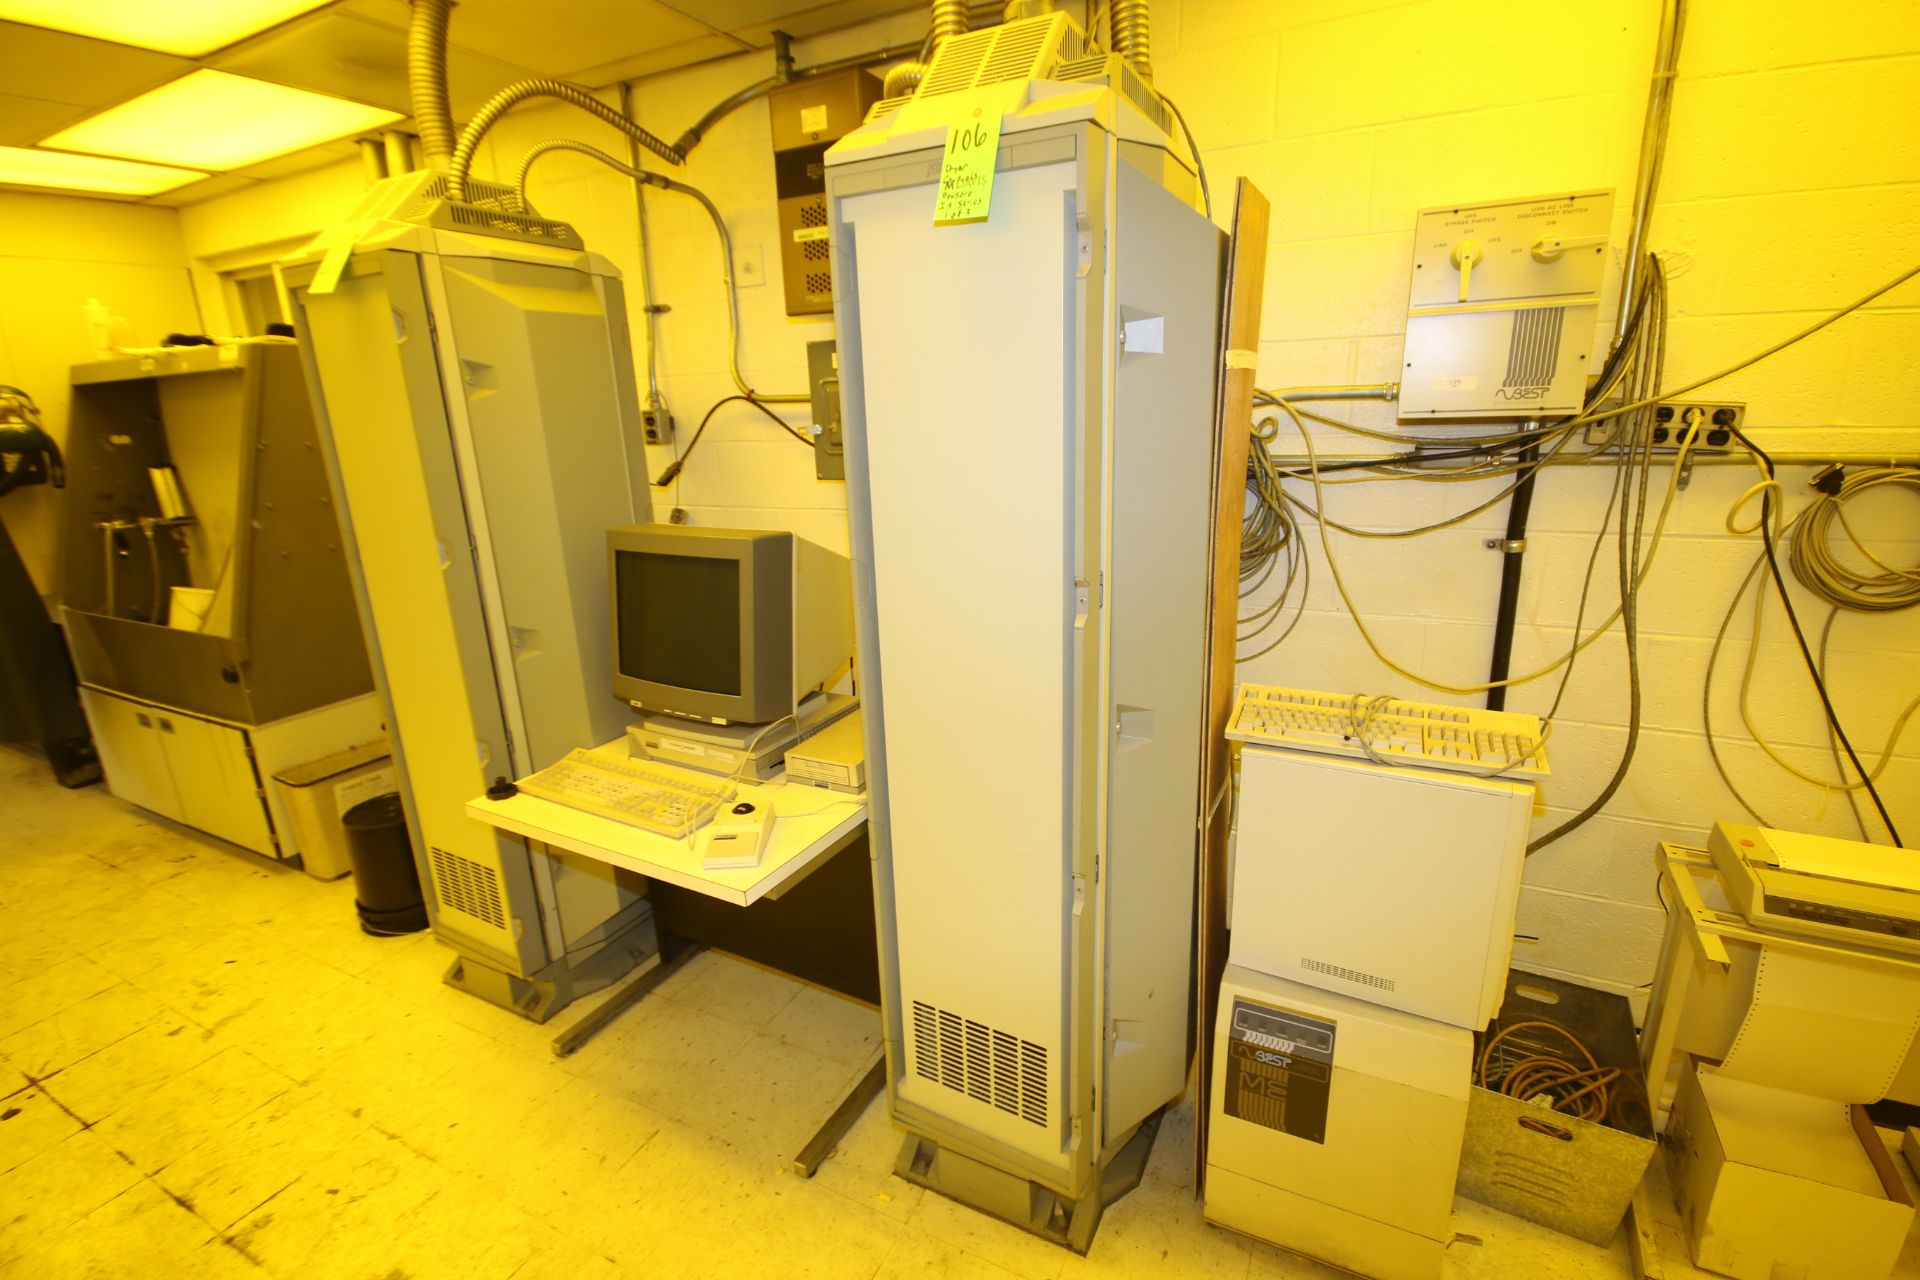 Foxboro IA Series Dryer and Other Line Control Cabinets with Computer System and Desk (Located in